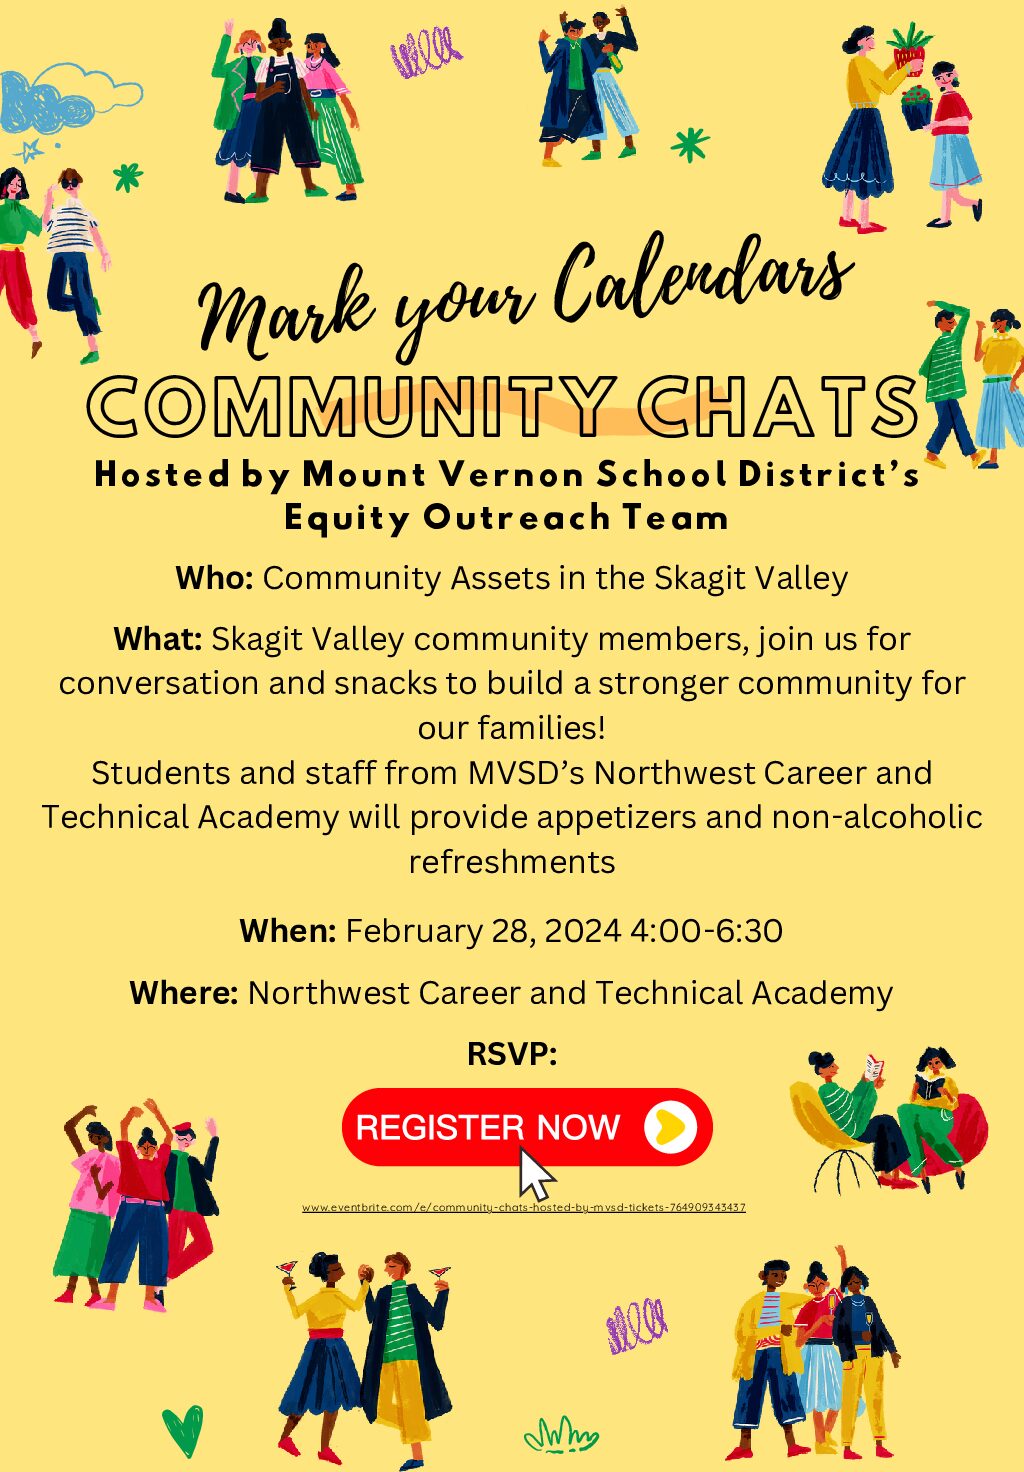 COMMUNITY CHATS: Hosted by Mount Vernon School District’s Equity Outreach Team